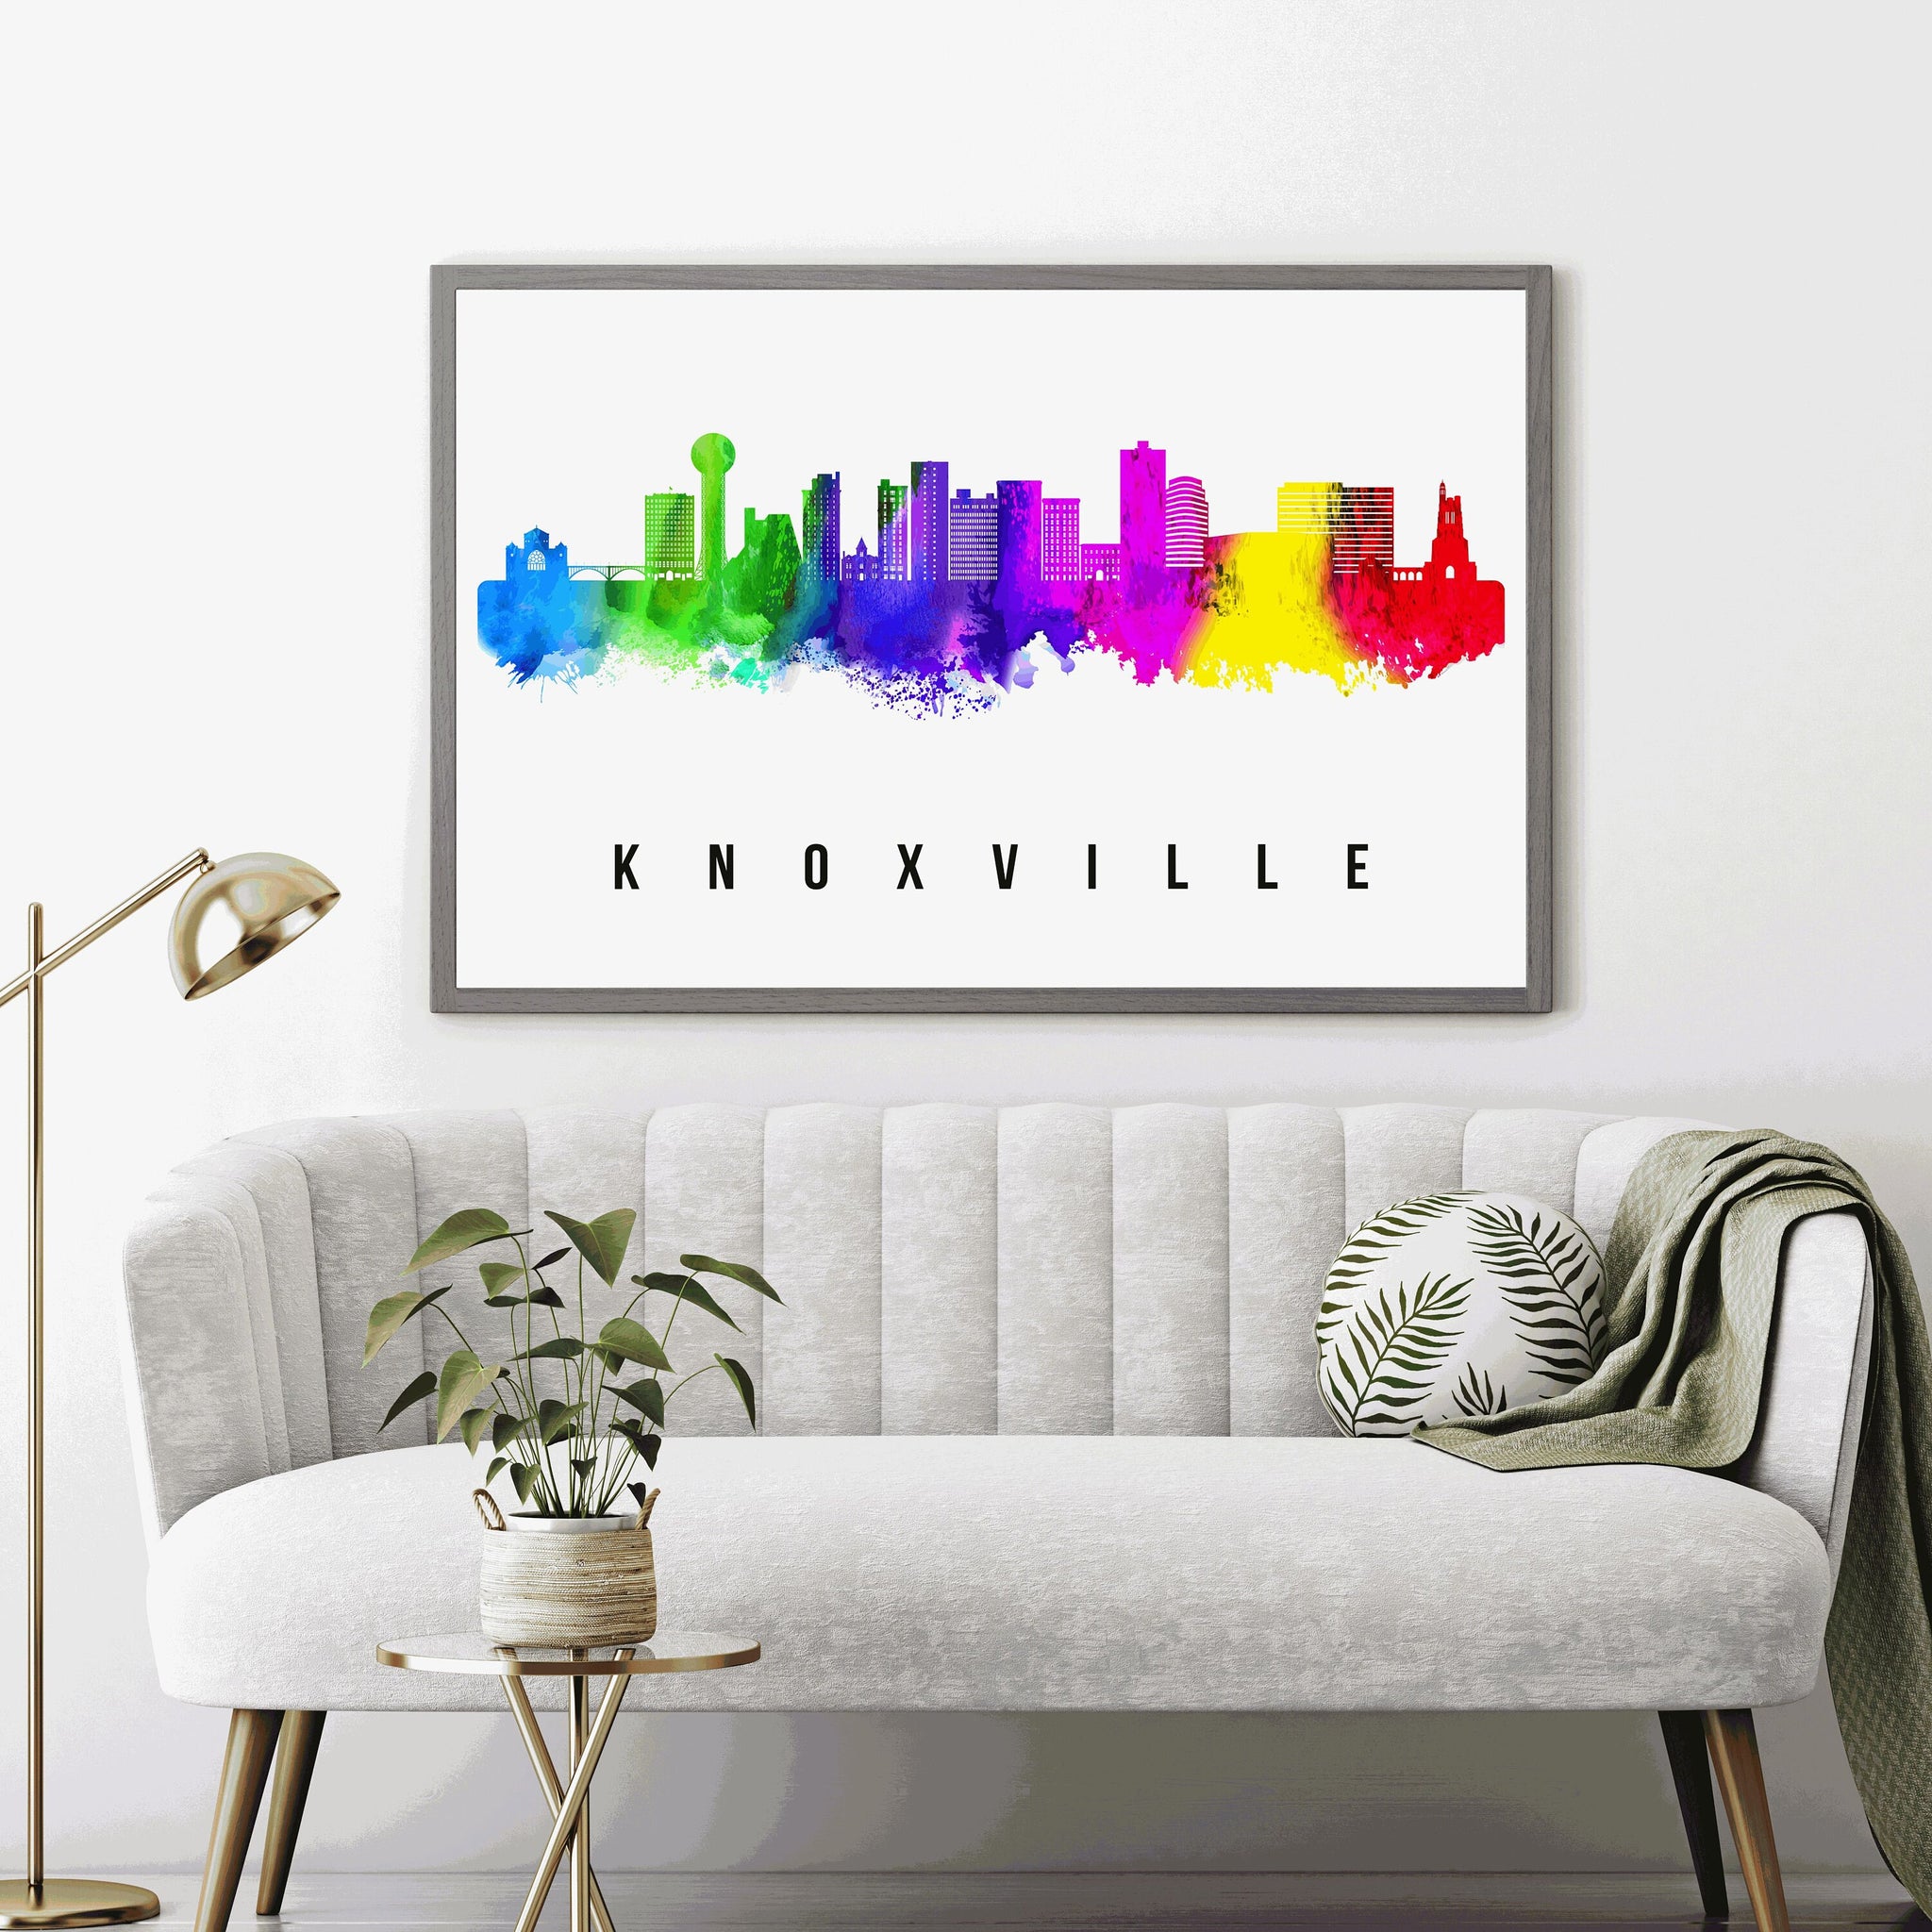 Knoxville - Tennessee Skyline Poster, Knoxville - Tennessee Cityscape Painting, Landmark and Cityscape Print, Home and Office Wall Art